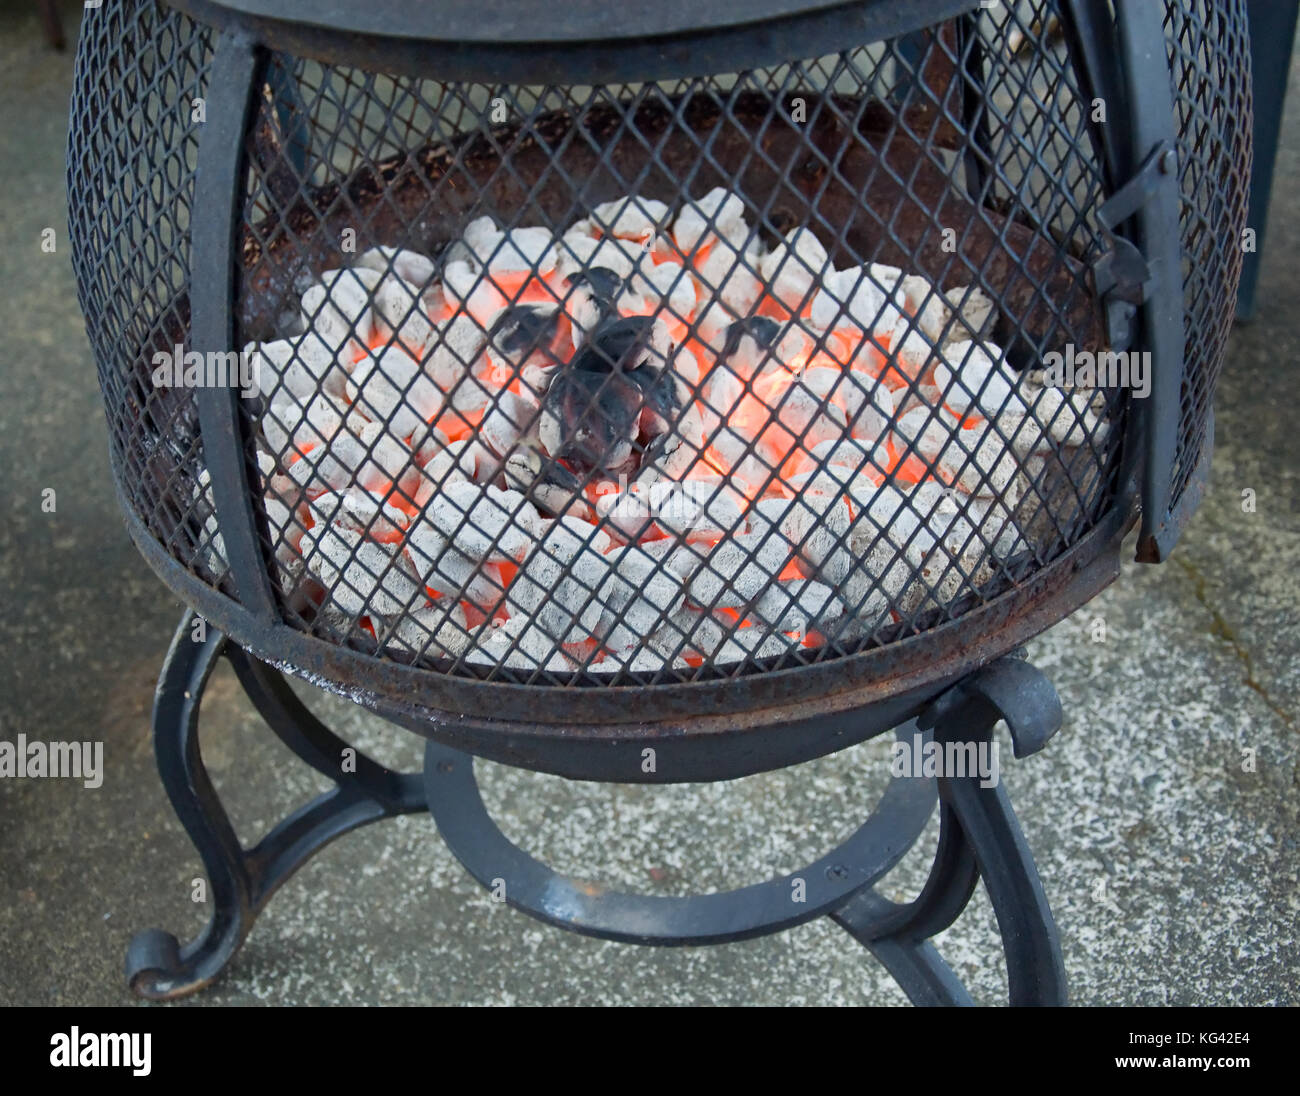 This is a black iron fire pit with red hot burning briquettes going. Stock Photo